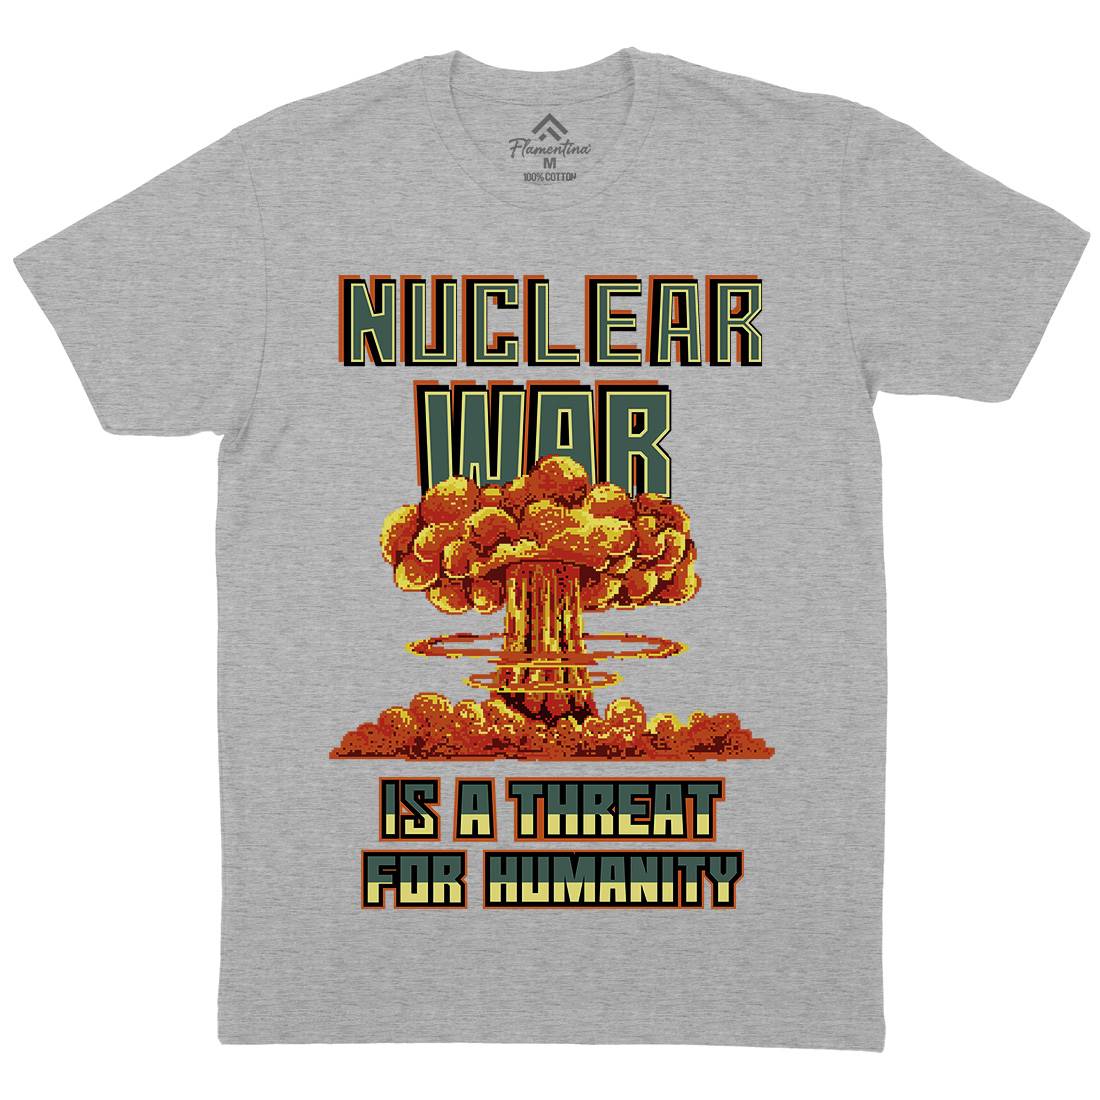 Nuclear War Is A Threat For Humanity Mens Crew Neck T-Shirt Army B941